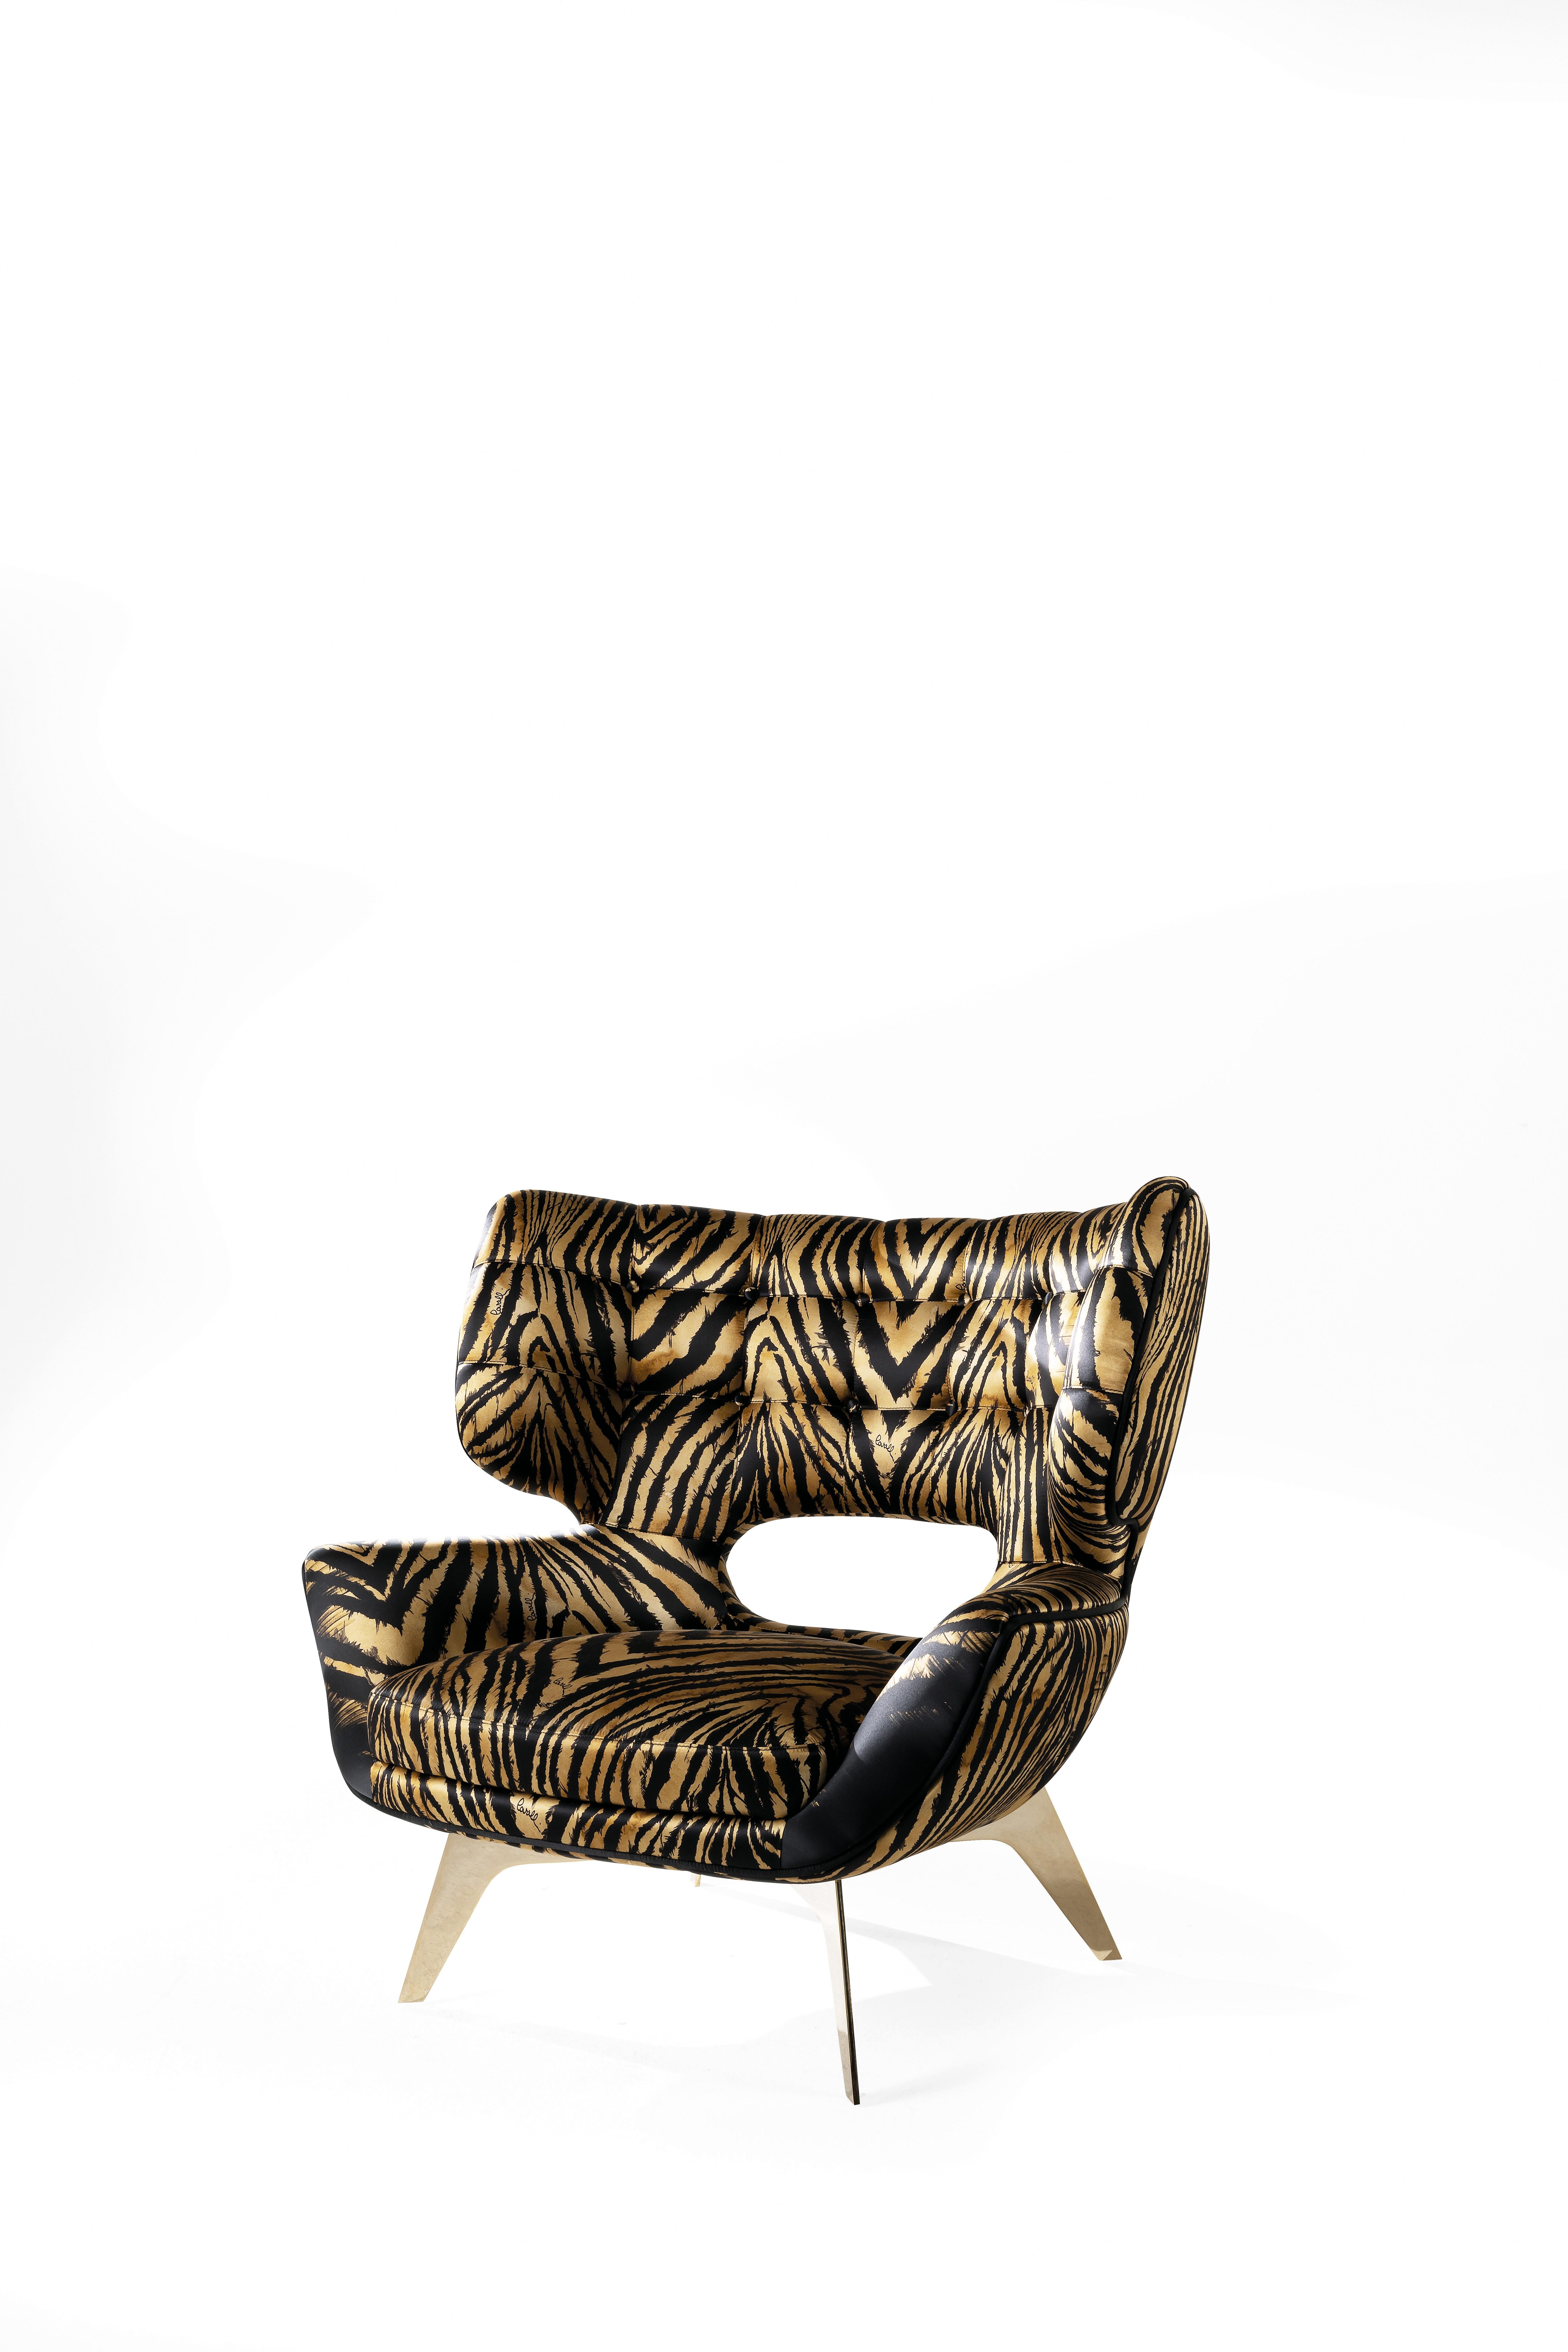 With a distinctive 50s style, this exuberant and refined armchair lends a chic and contemporary touch to the living room. Maclaine comes in different finishings; in this case, it is upholstered in the new Wild Tiger print.
Maclaine armchair with